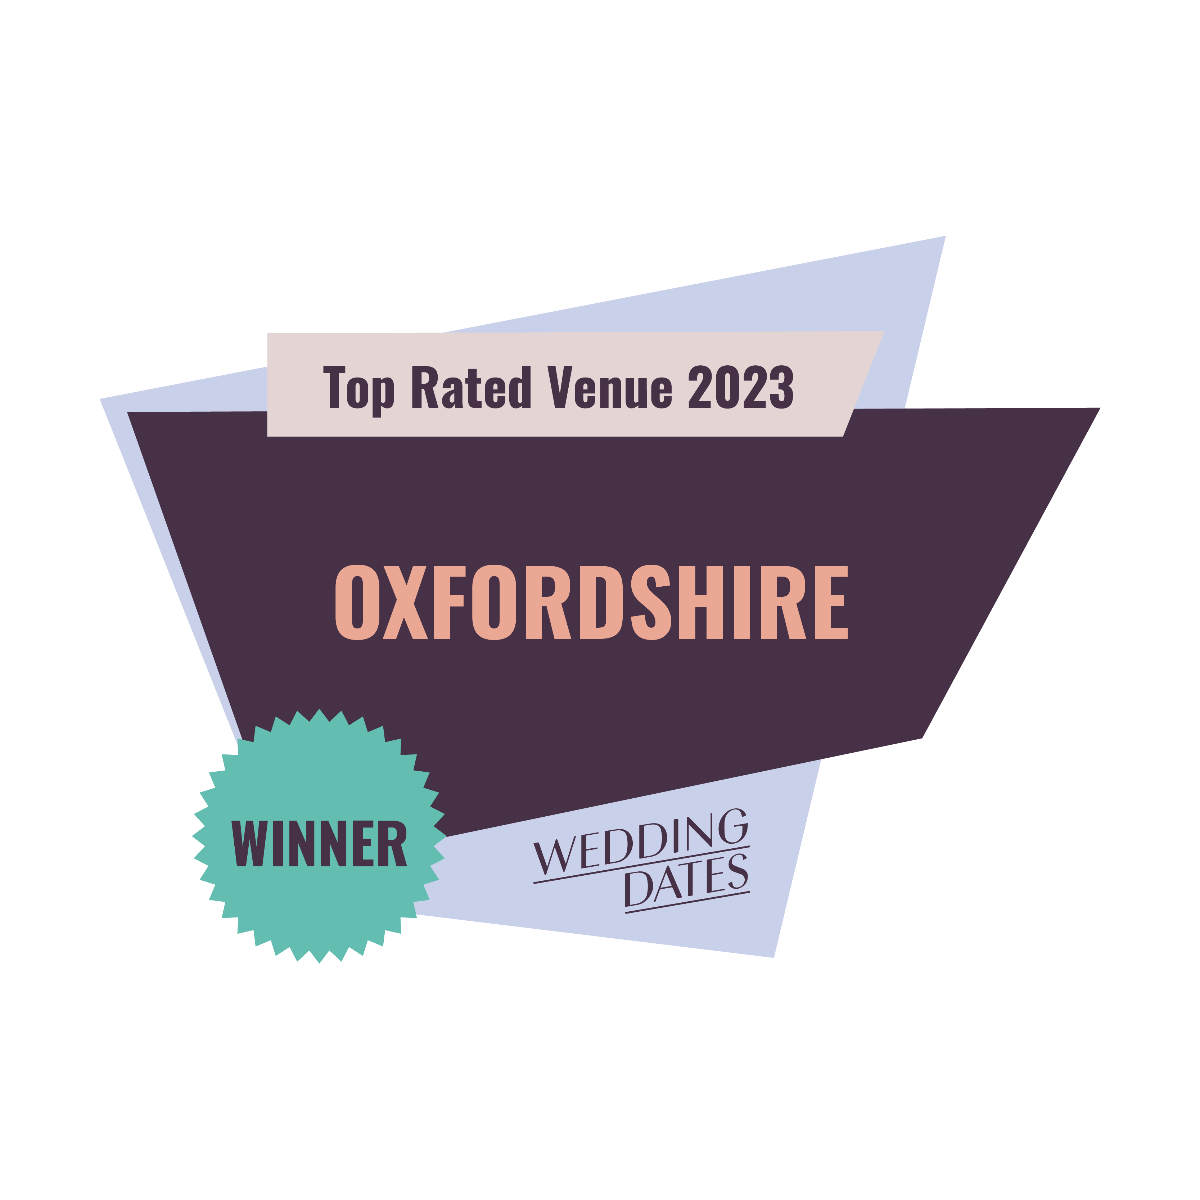 2023 Wedding Dates Top Rated Venue in Oxfordshire